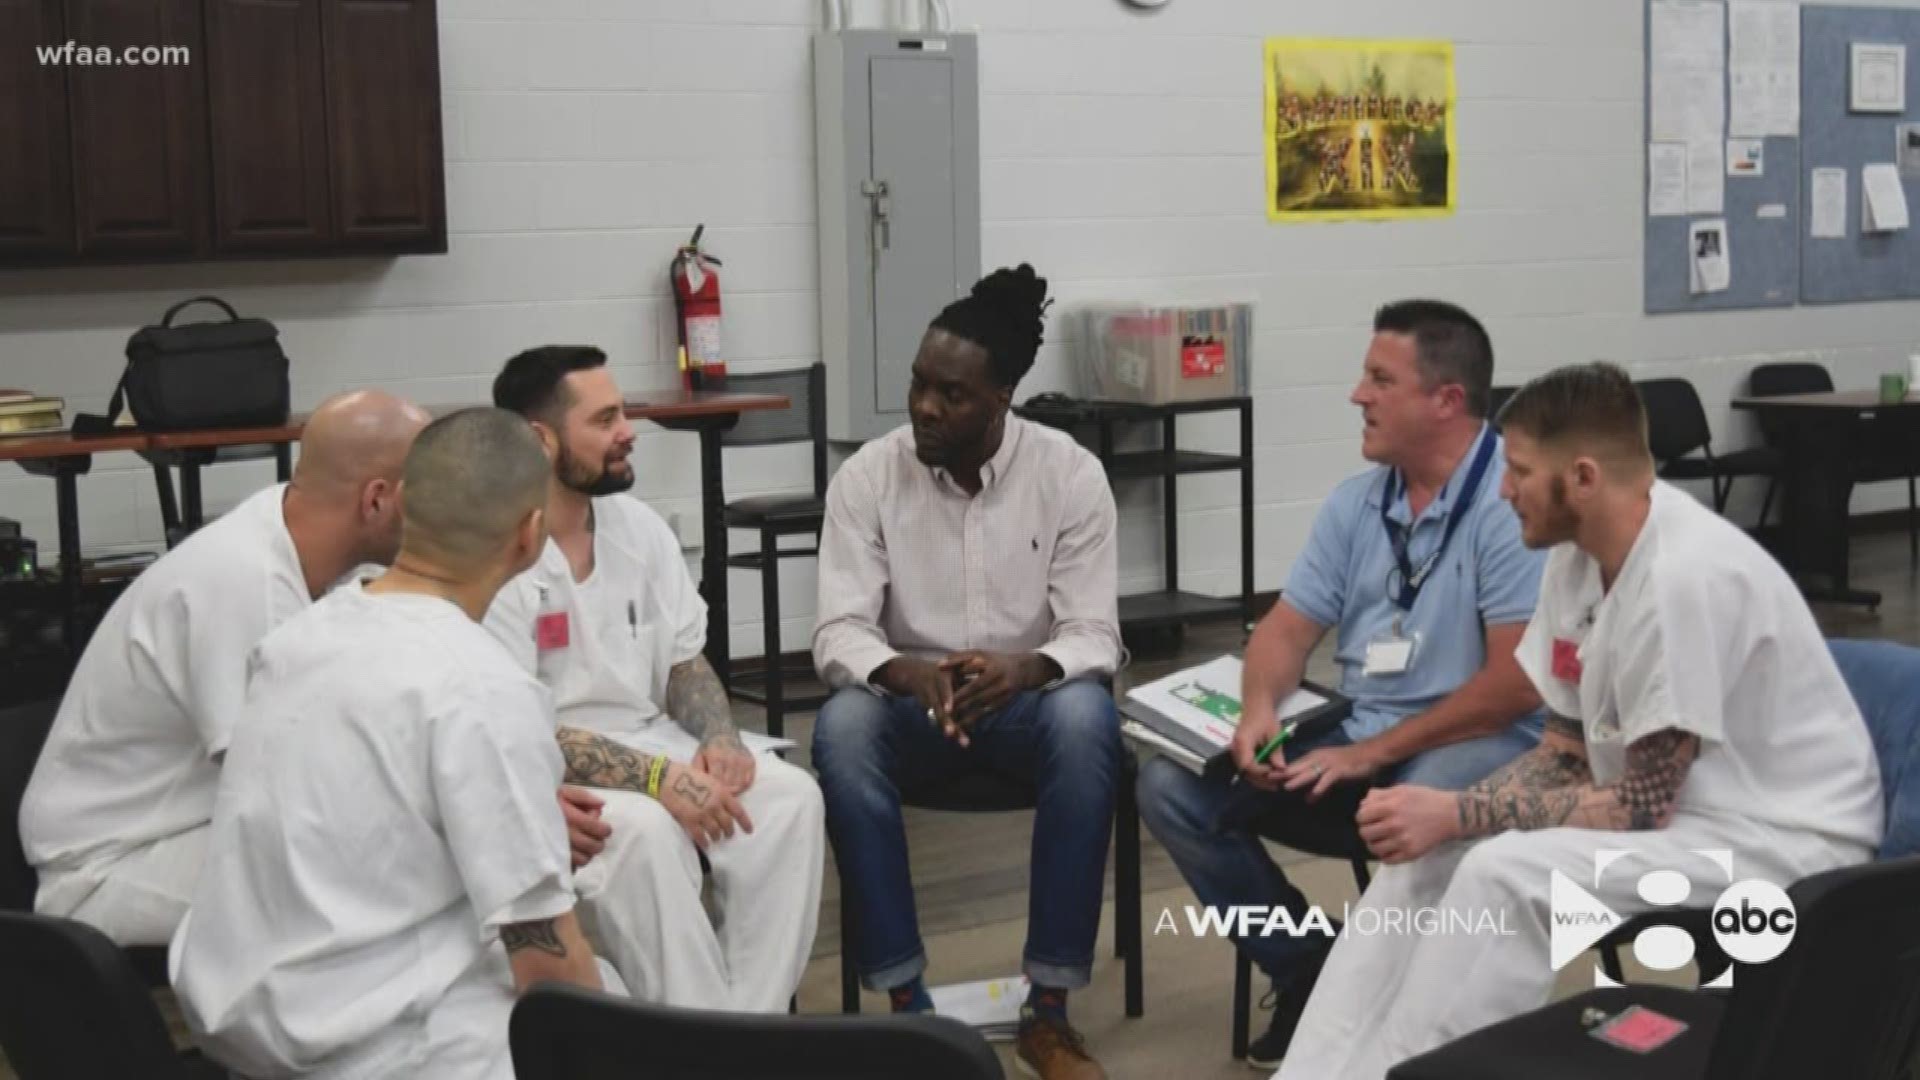 Bridges to Life isn't a prison ministry and doesn’t teach a trade. Instead, it connects victims with felons who listen rather than lecture.